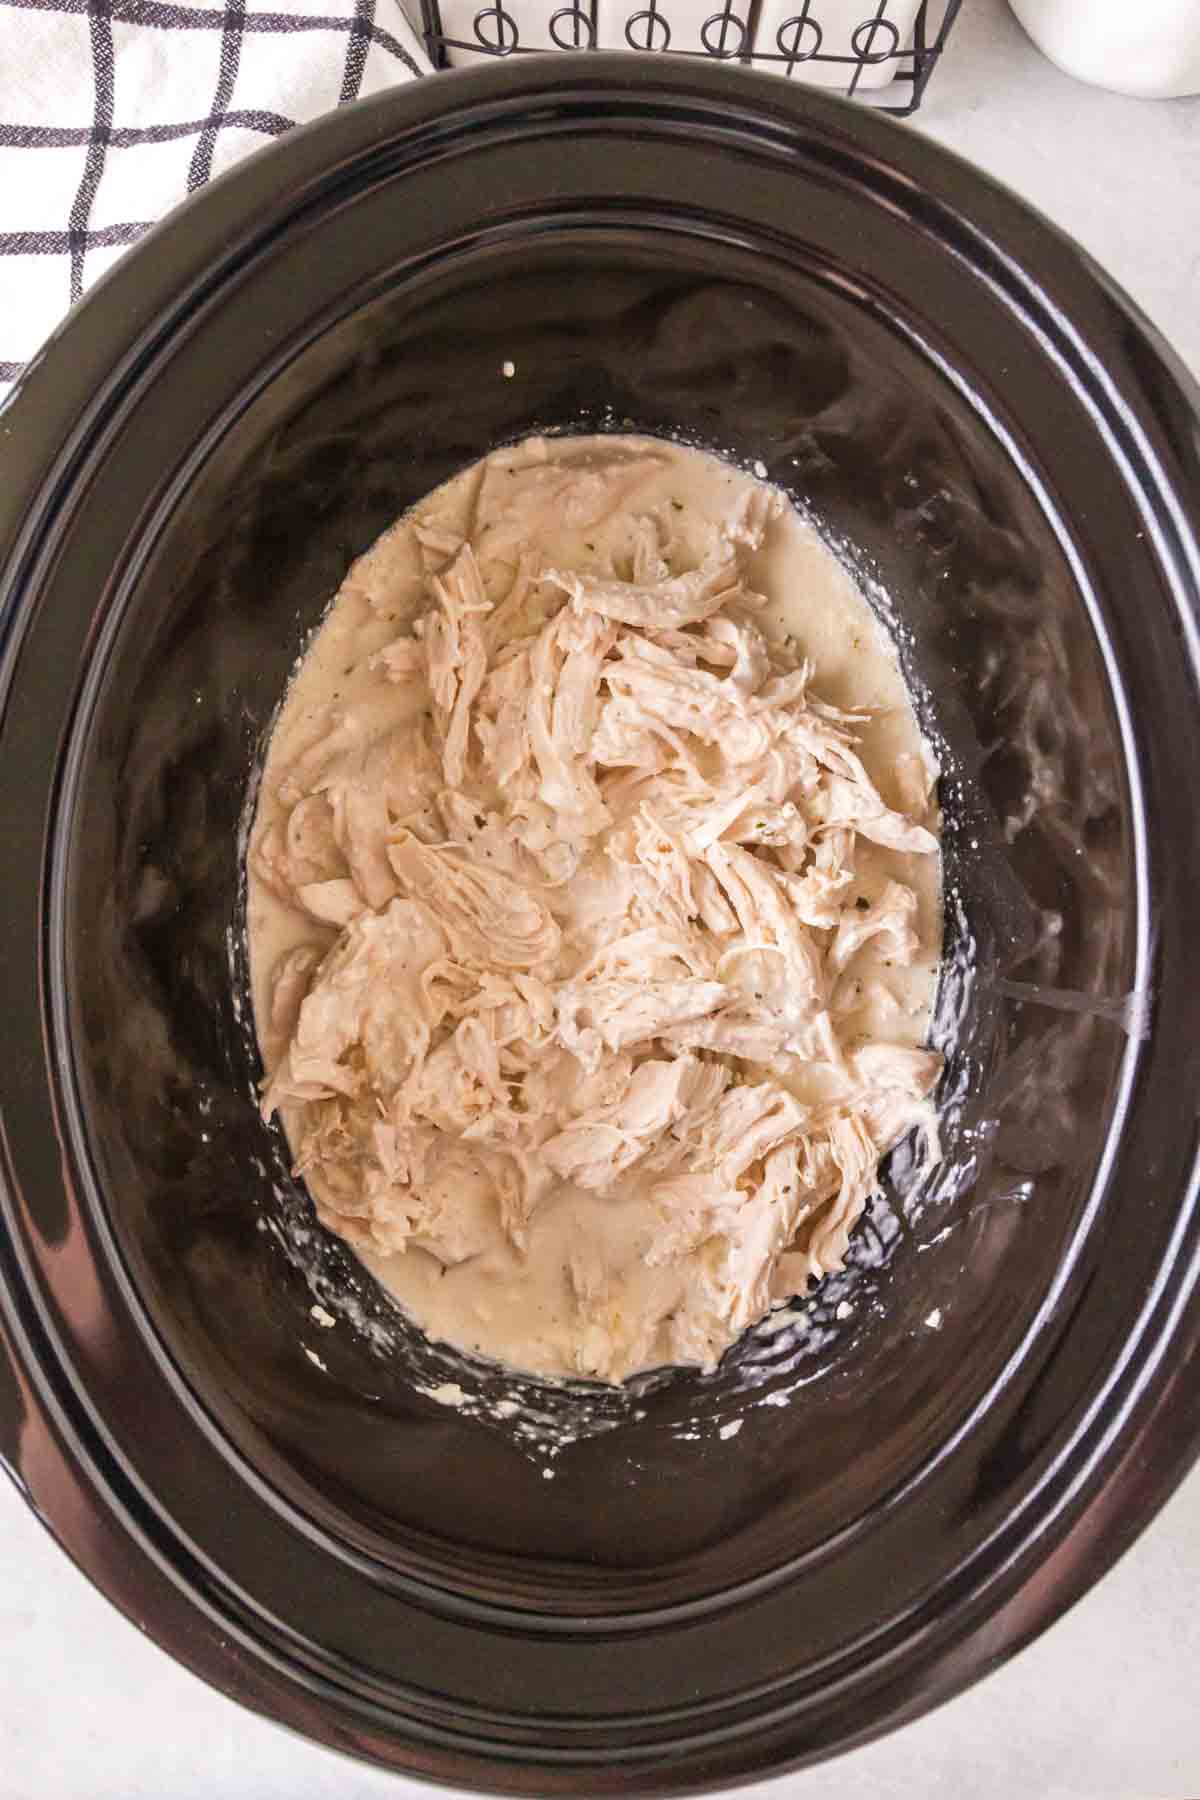 slow cooker with seasoned crack chicken inside shredded and sauced